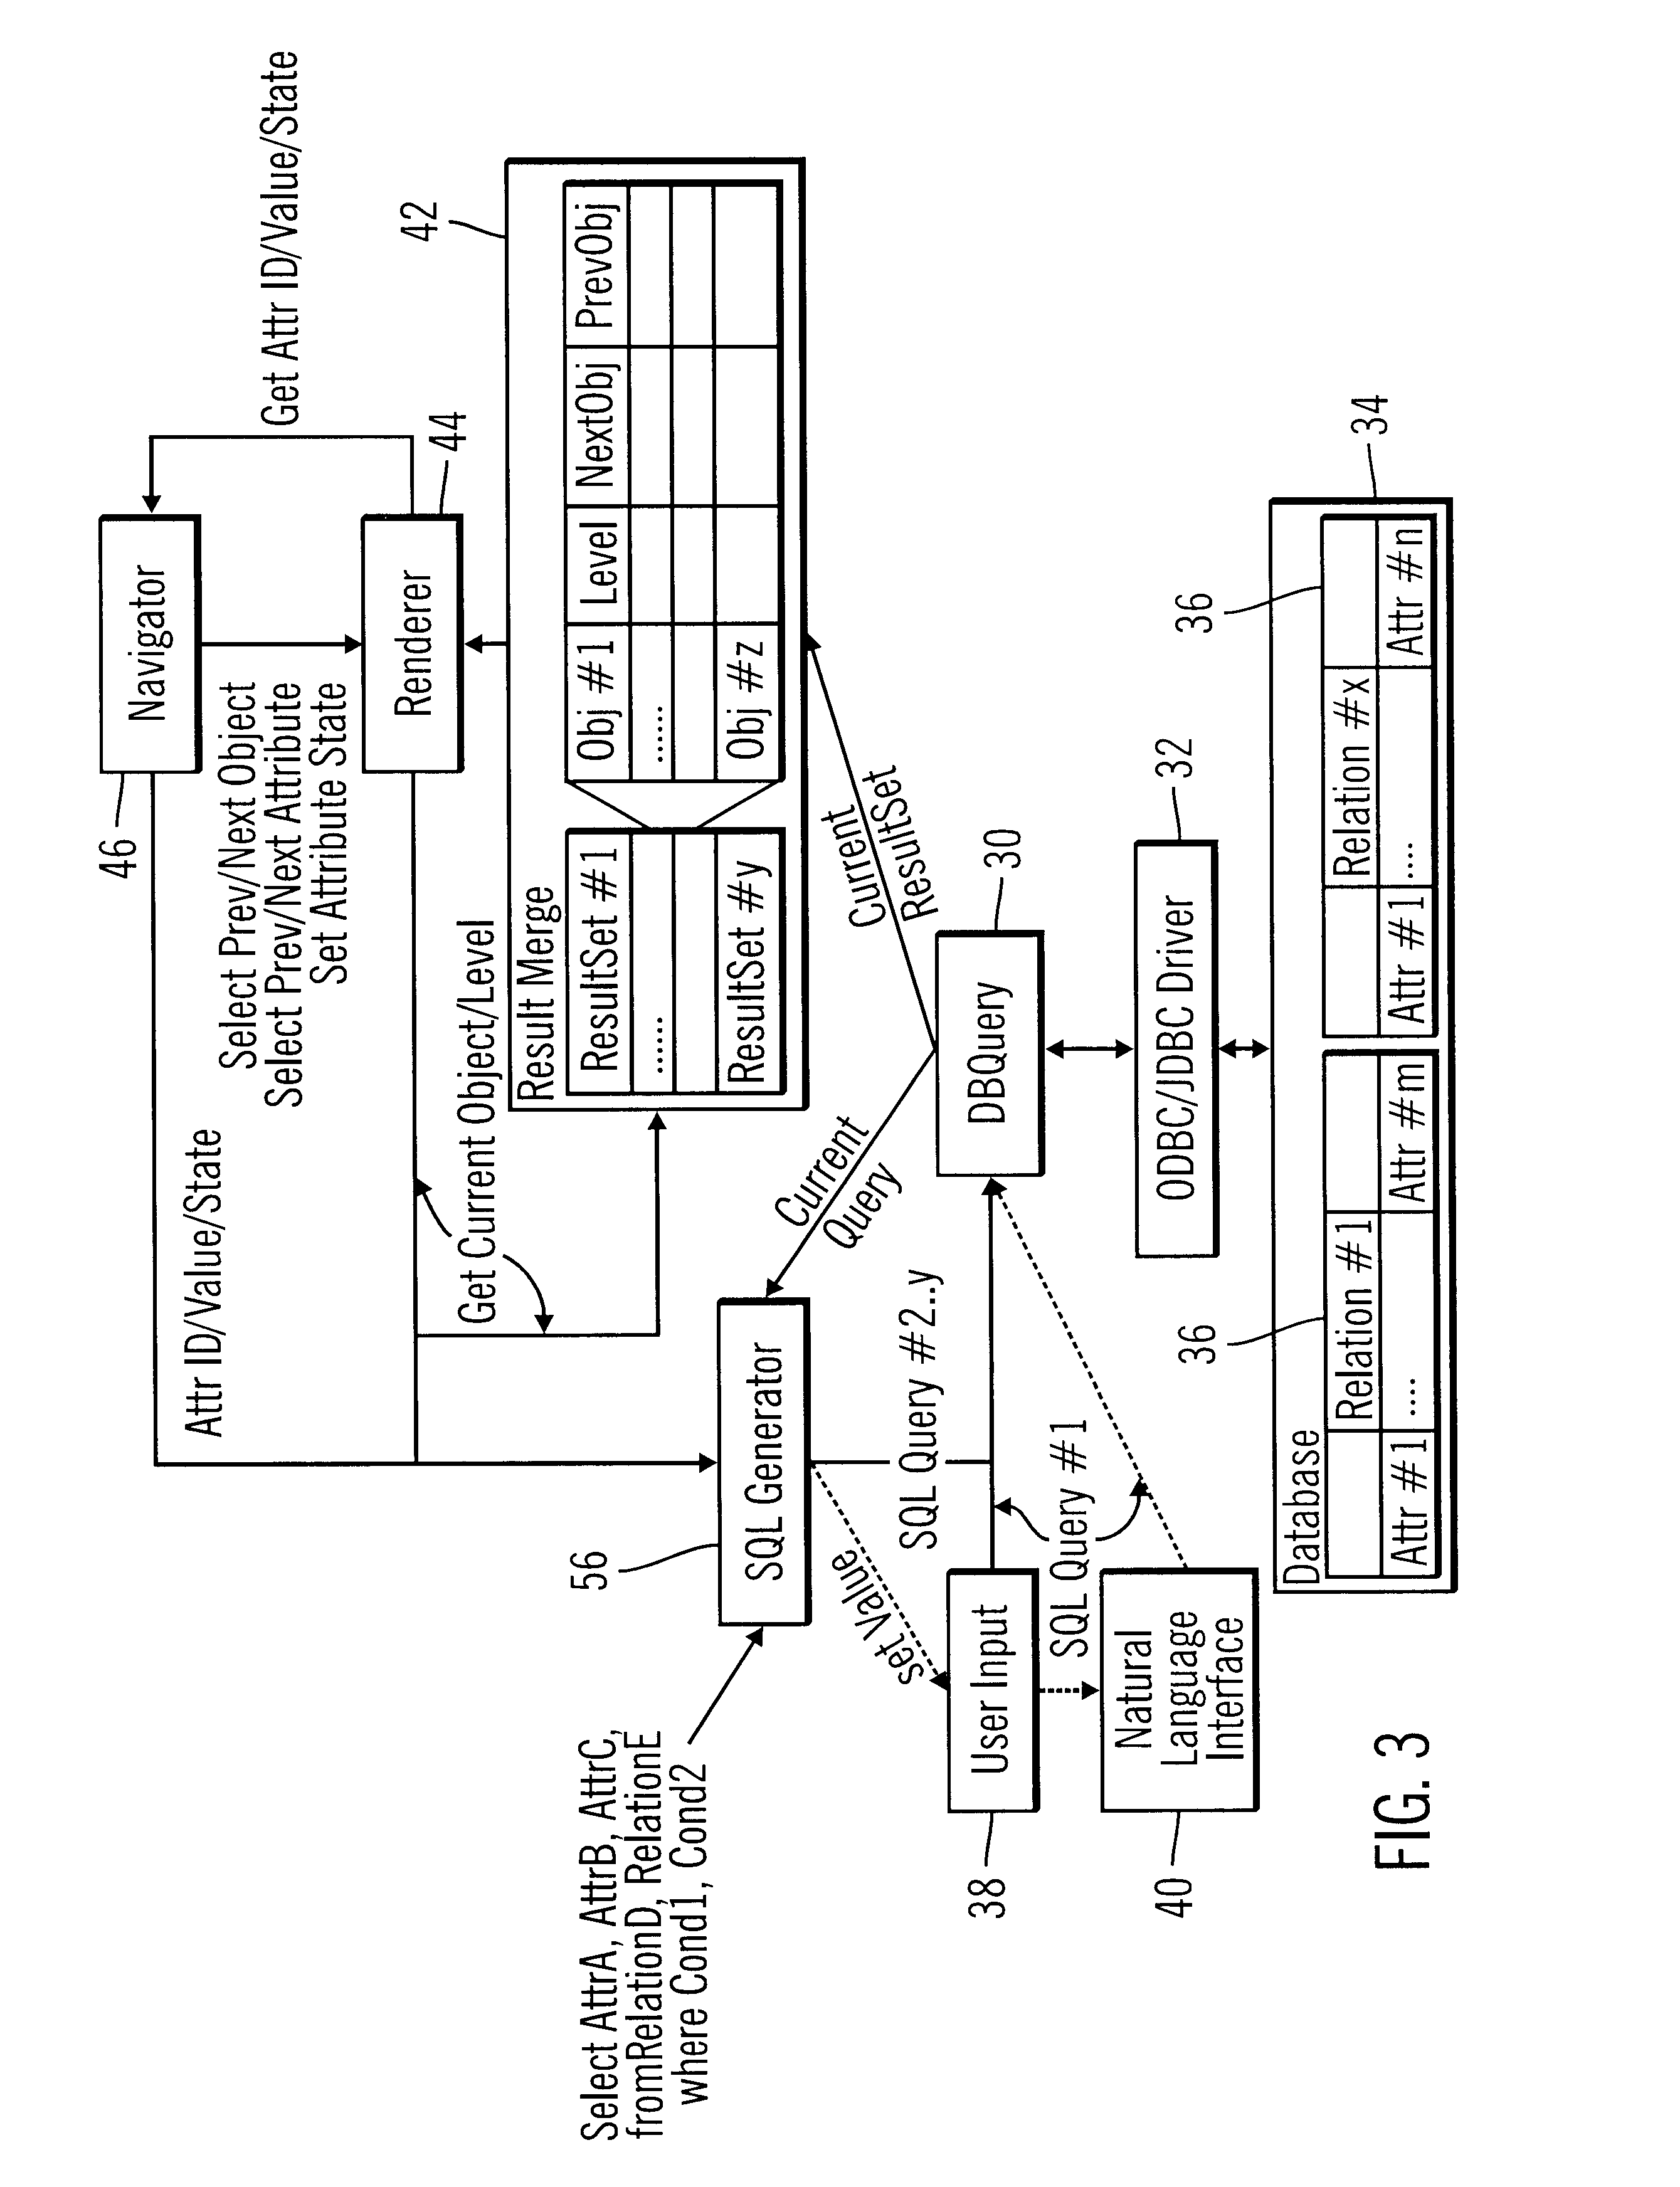 Method, system, and program for merging query search results